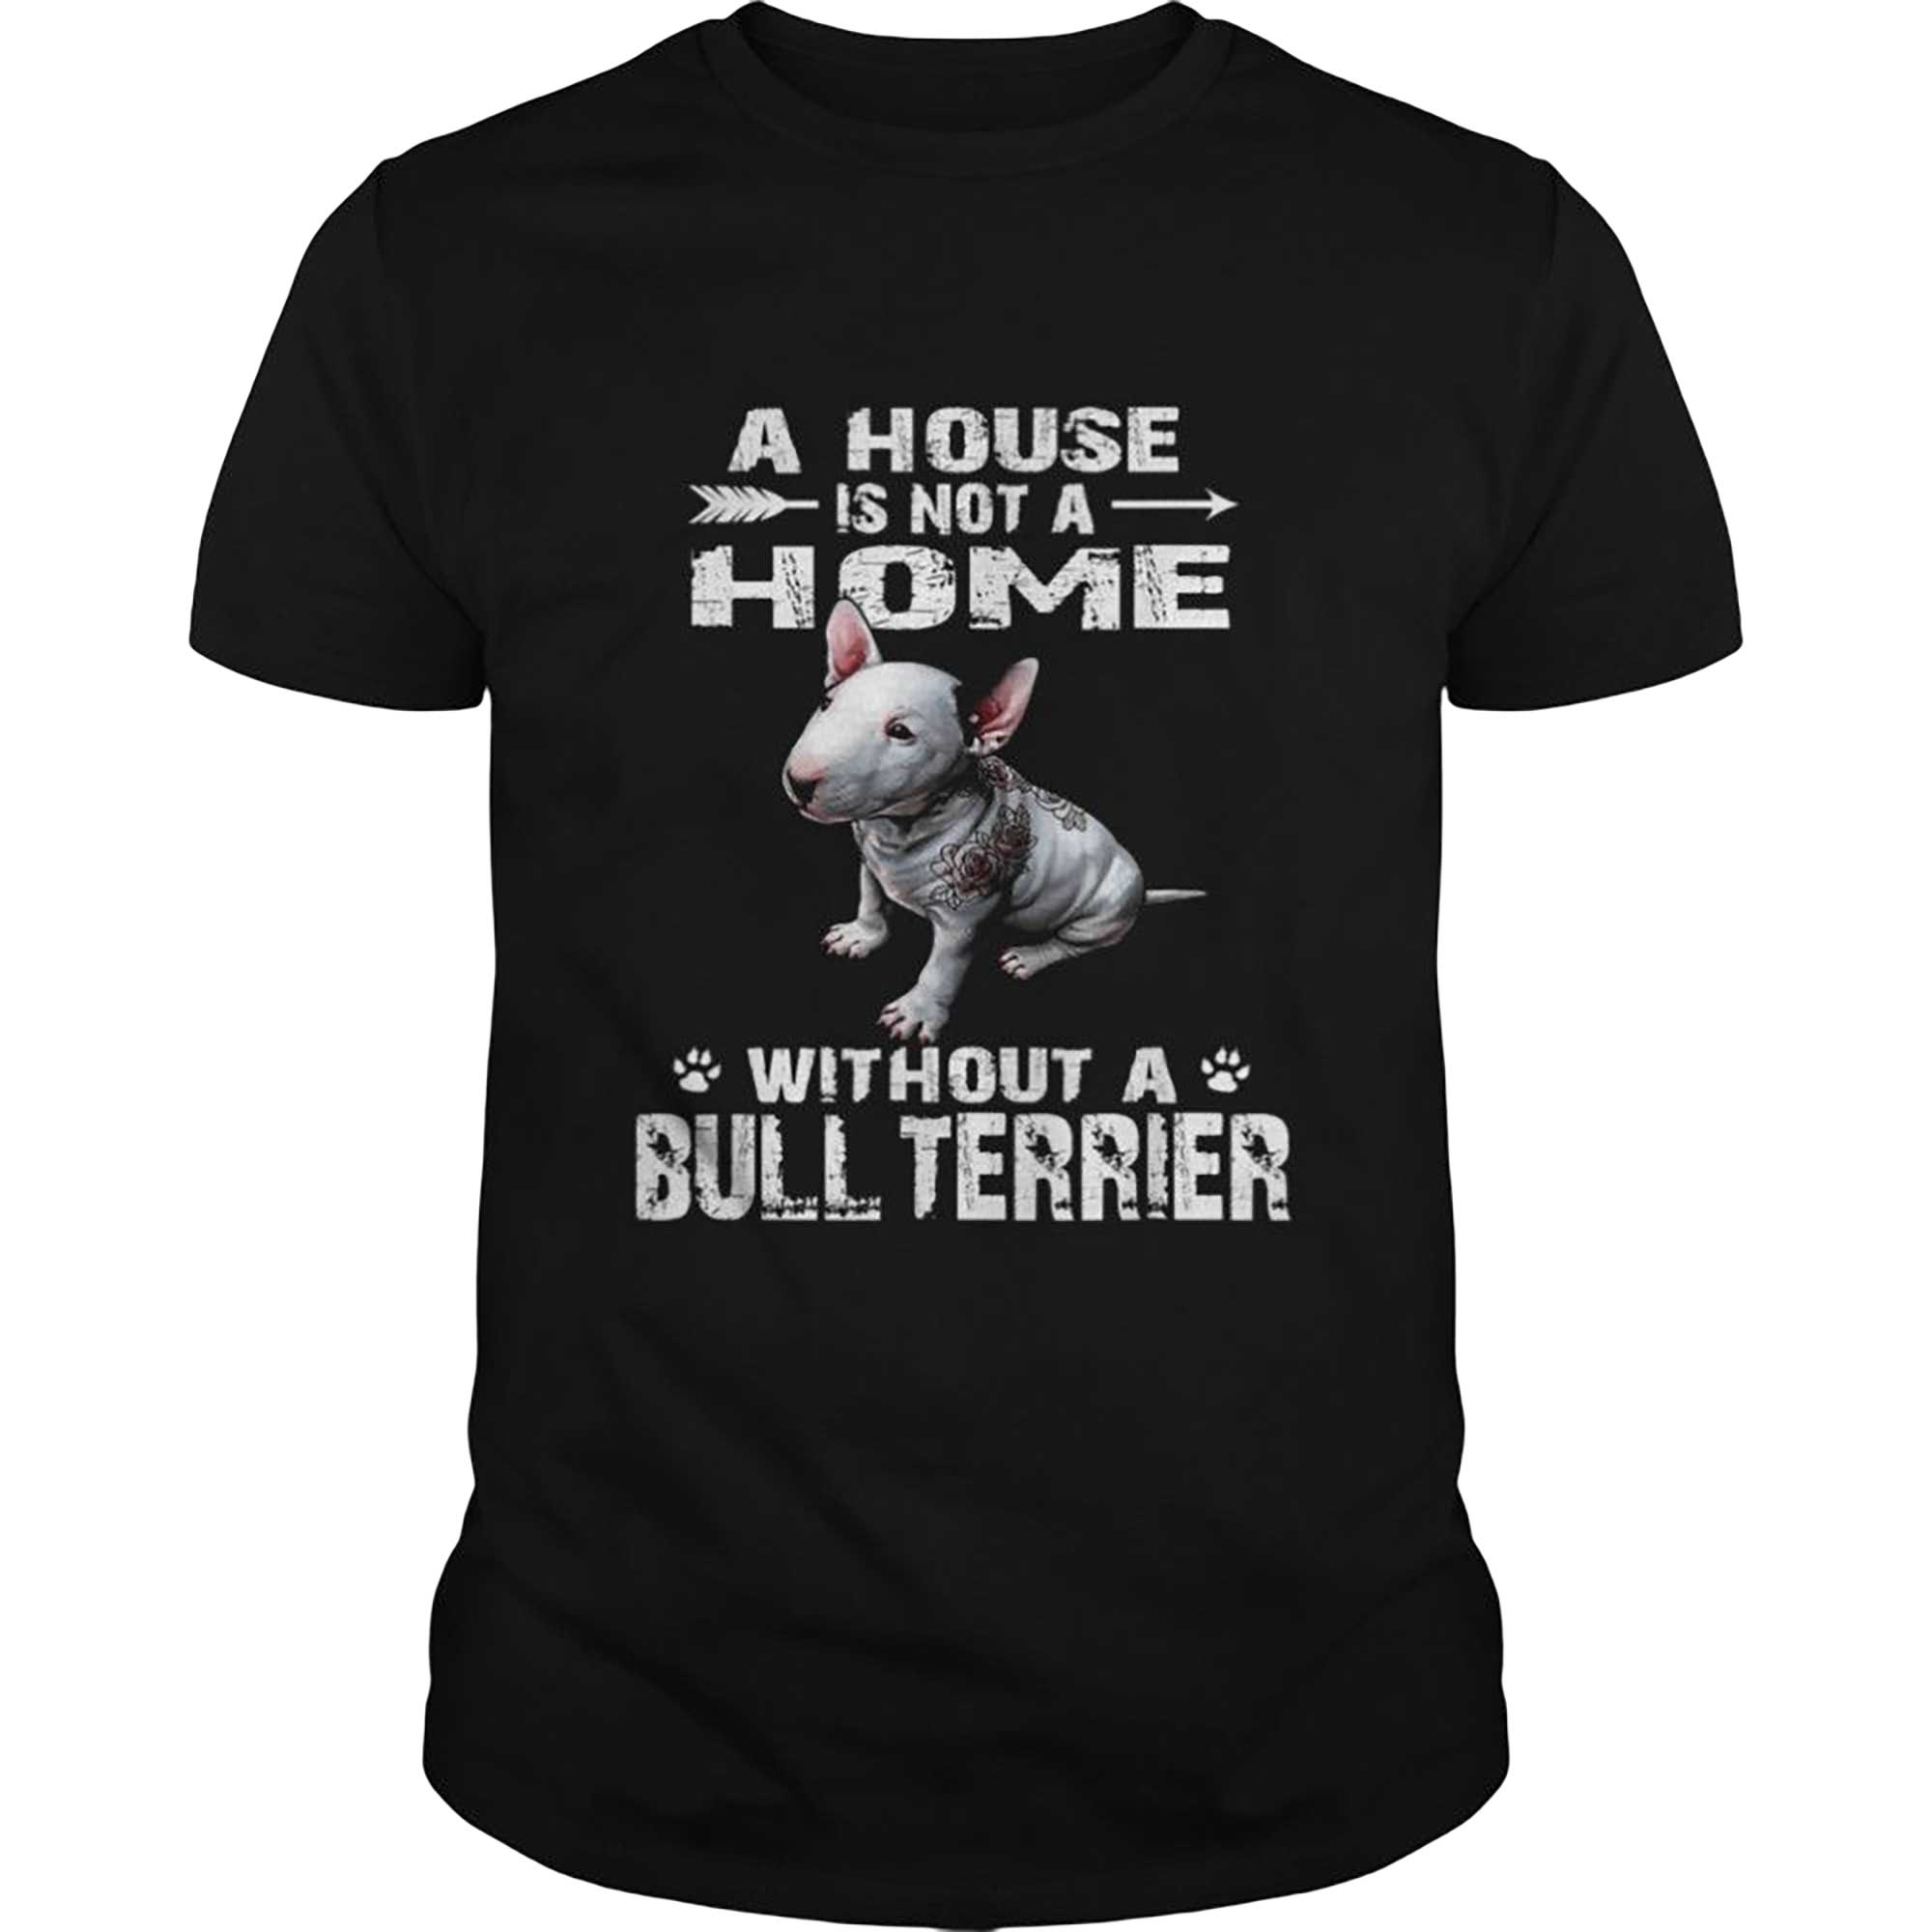 Skitongift-A-House-Is-Not-A-Home-Without-A-Terrier-Shirt-Funny-Shirts-Hoodie-Sweater-Short-Sleeve-Casual-Shirt